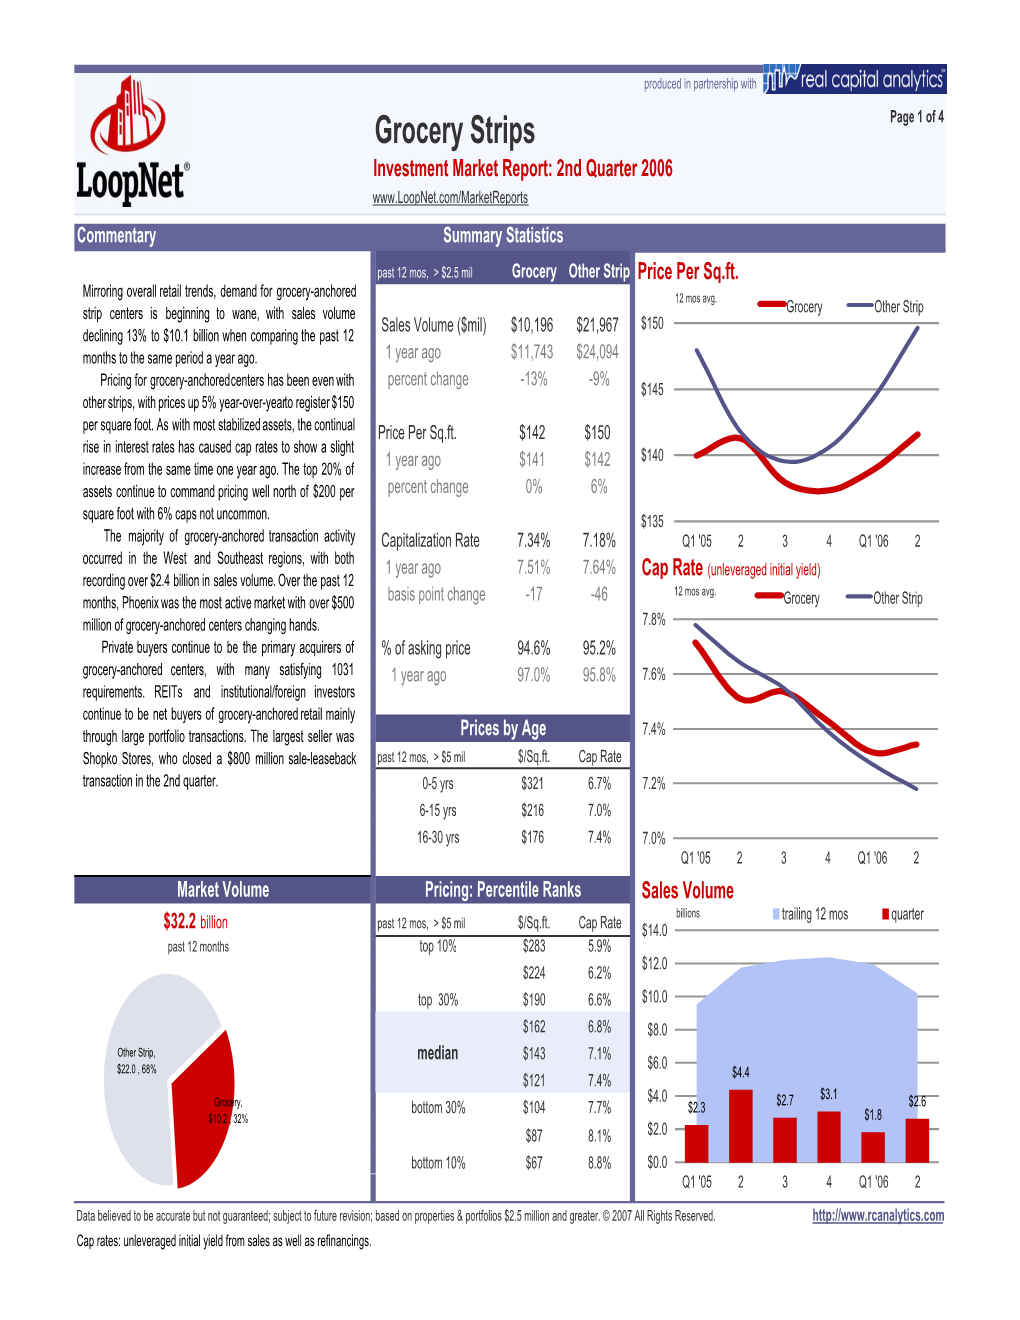 Grocery Strips Page 1 of 4 Investment Market Report: 2Nd Quarter 2006 Commentary Summary Statistics